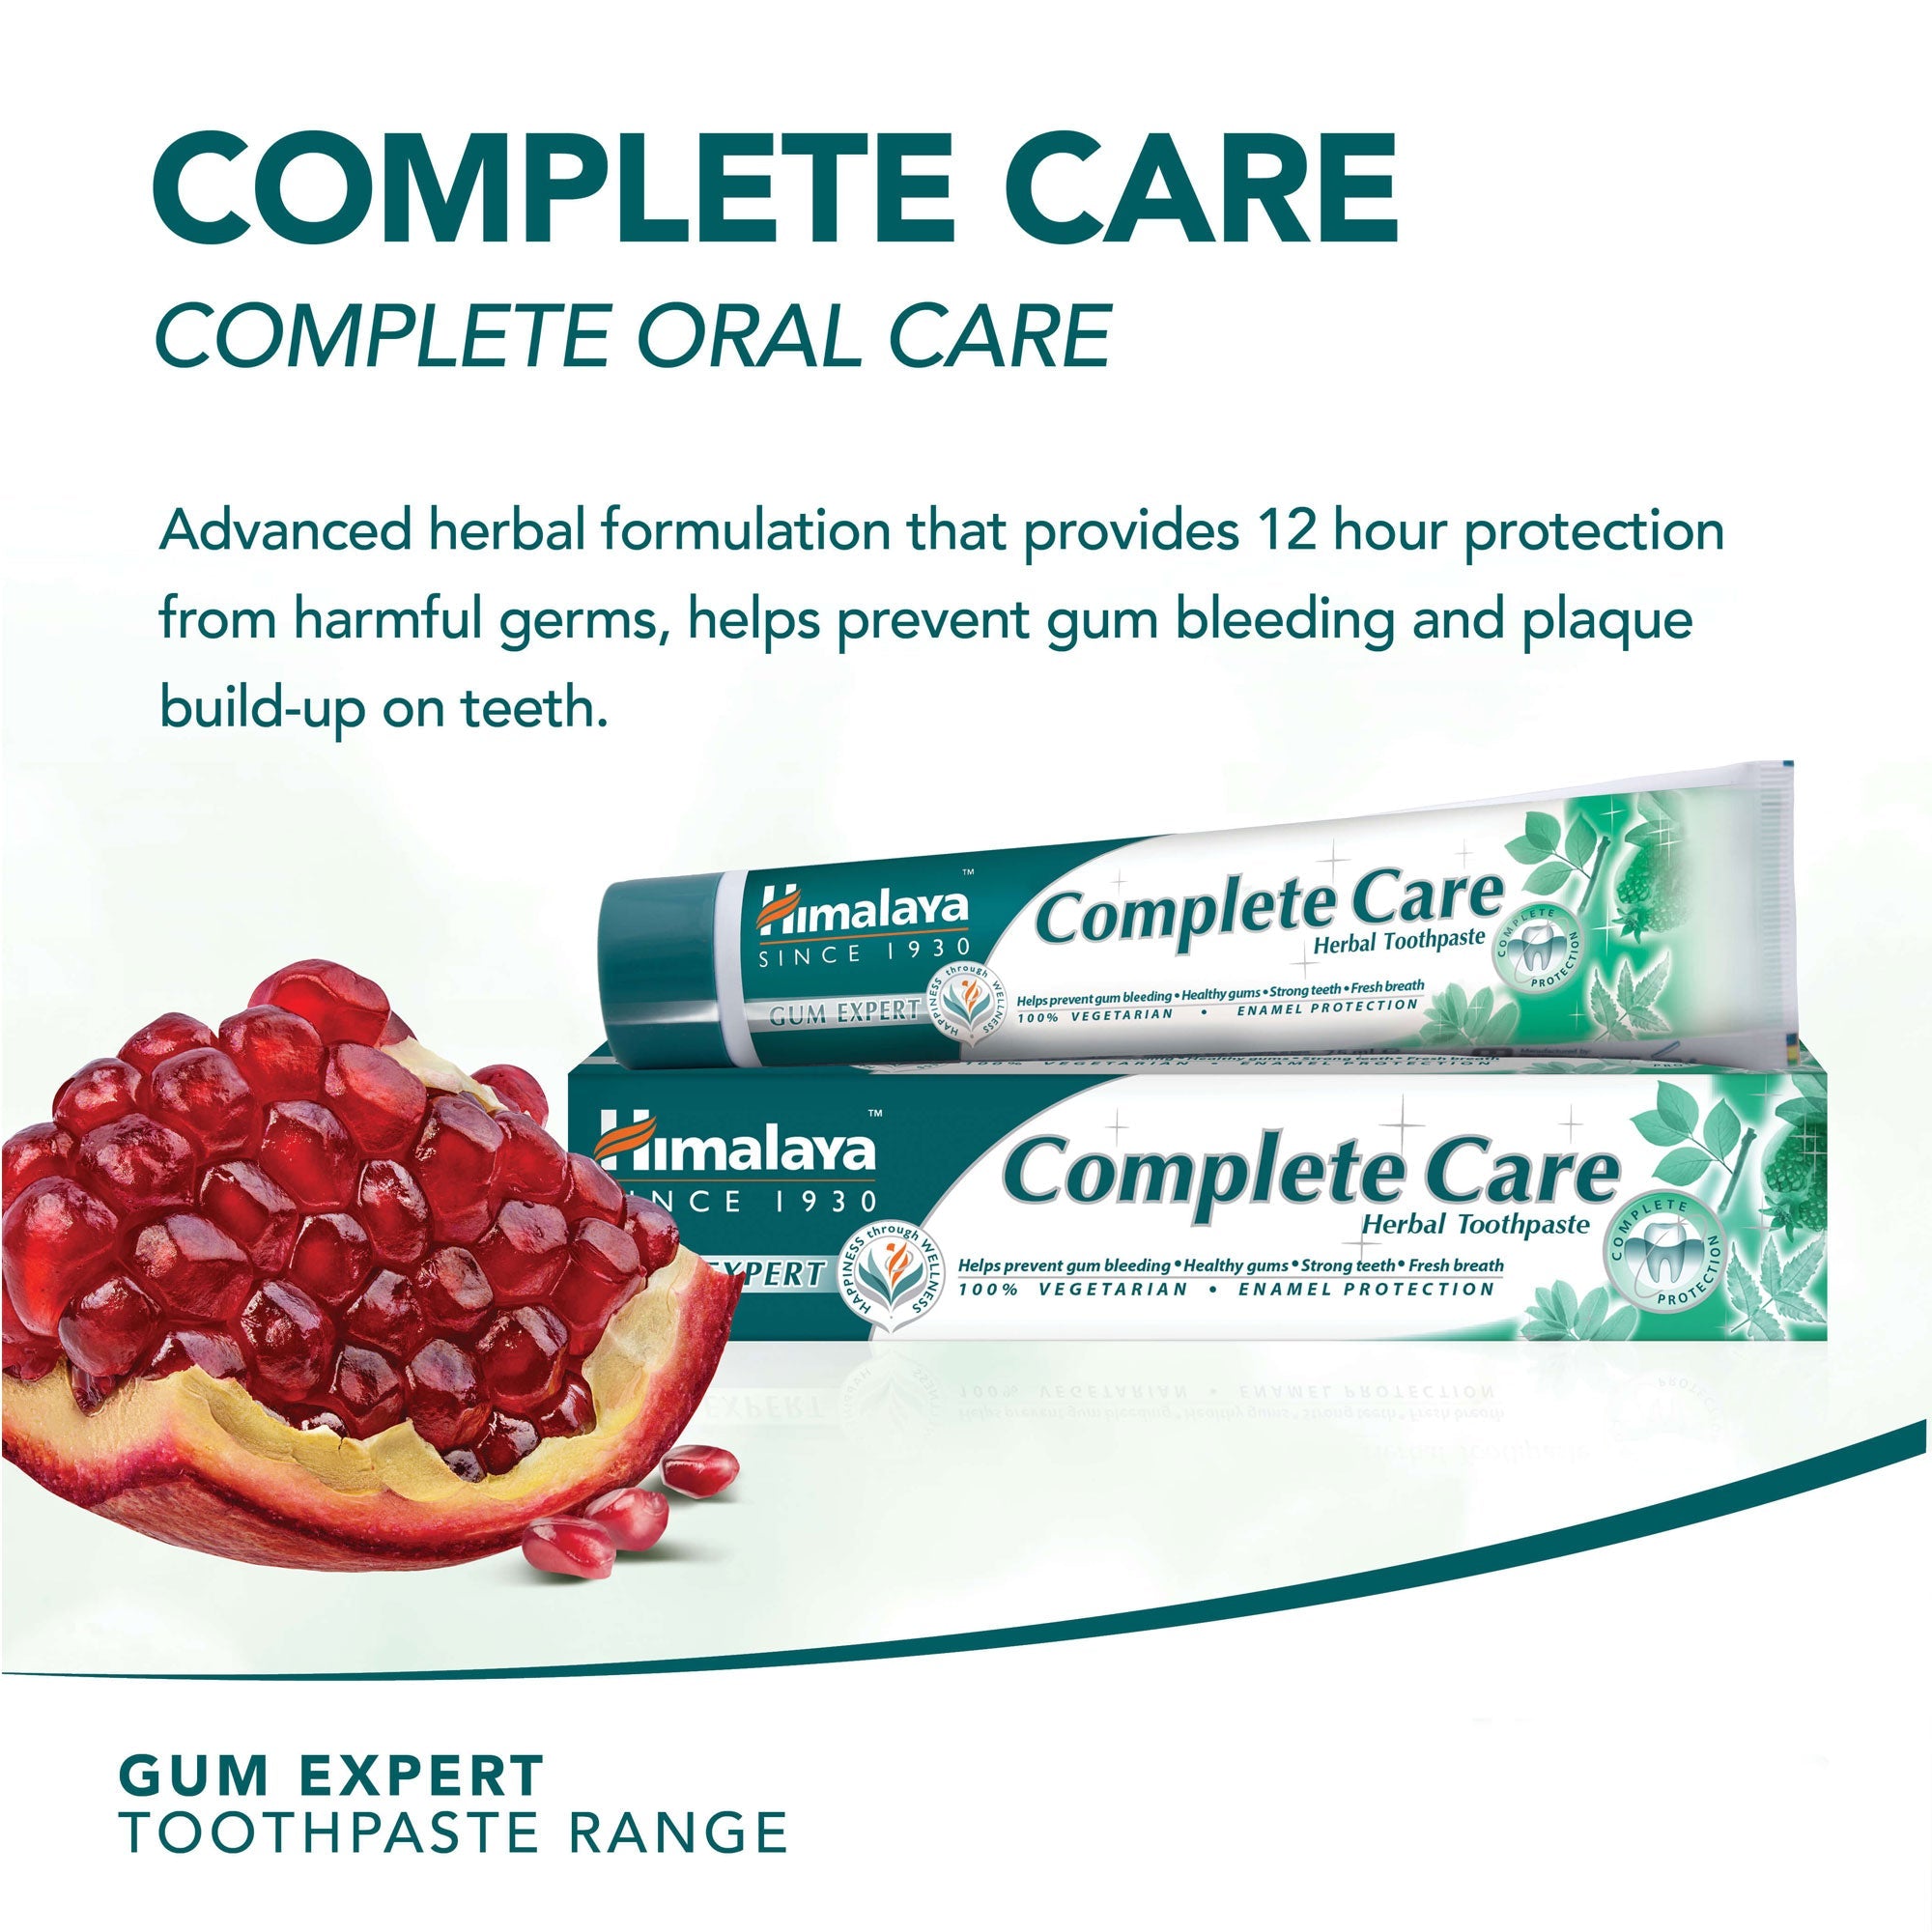 Himalaya Gum Expert Herbal Toothpaste - Complete Care - 75ml (Pack of 2)